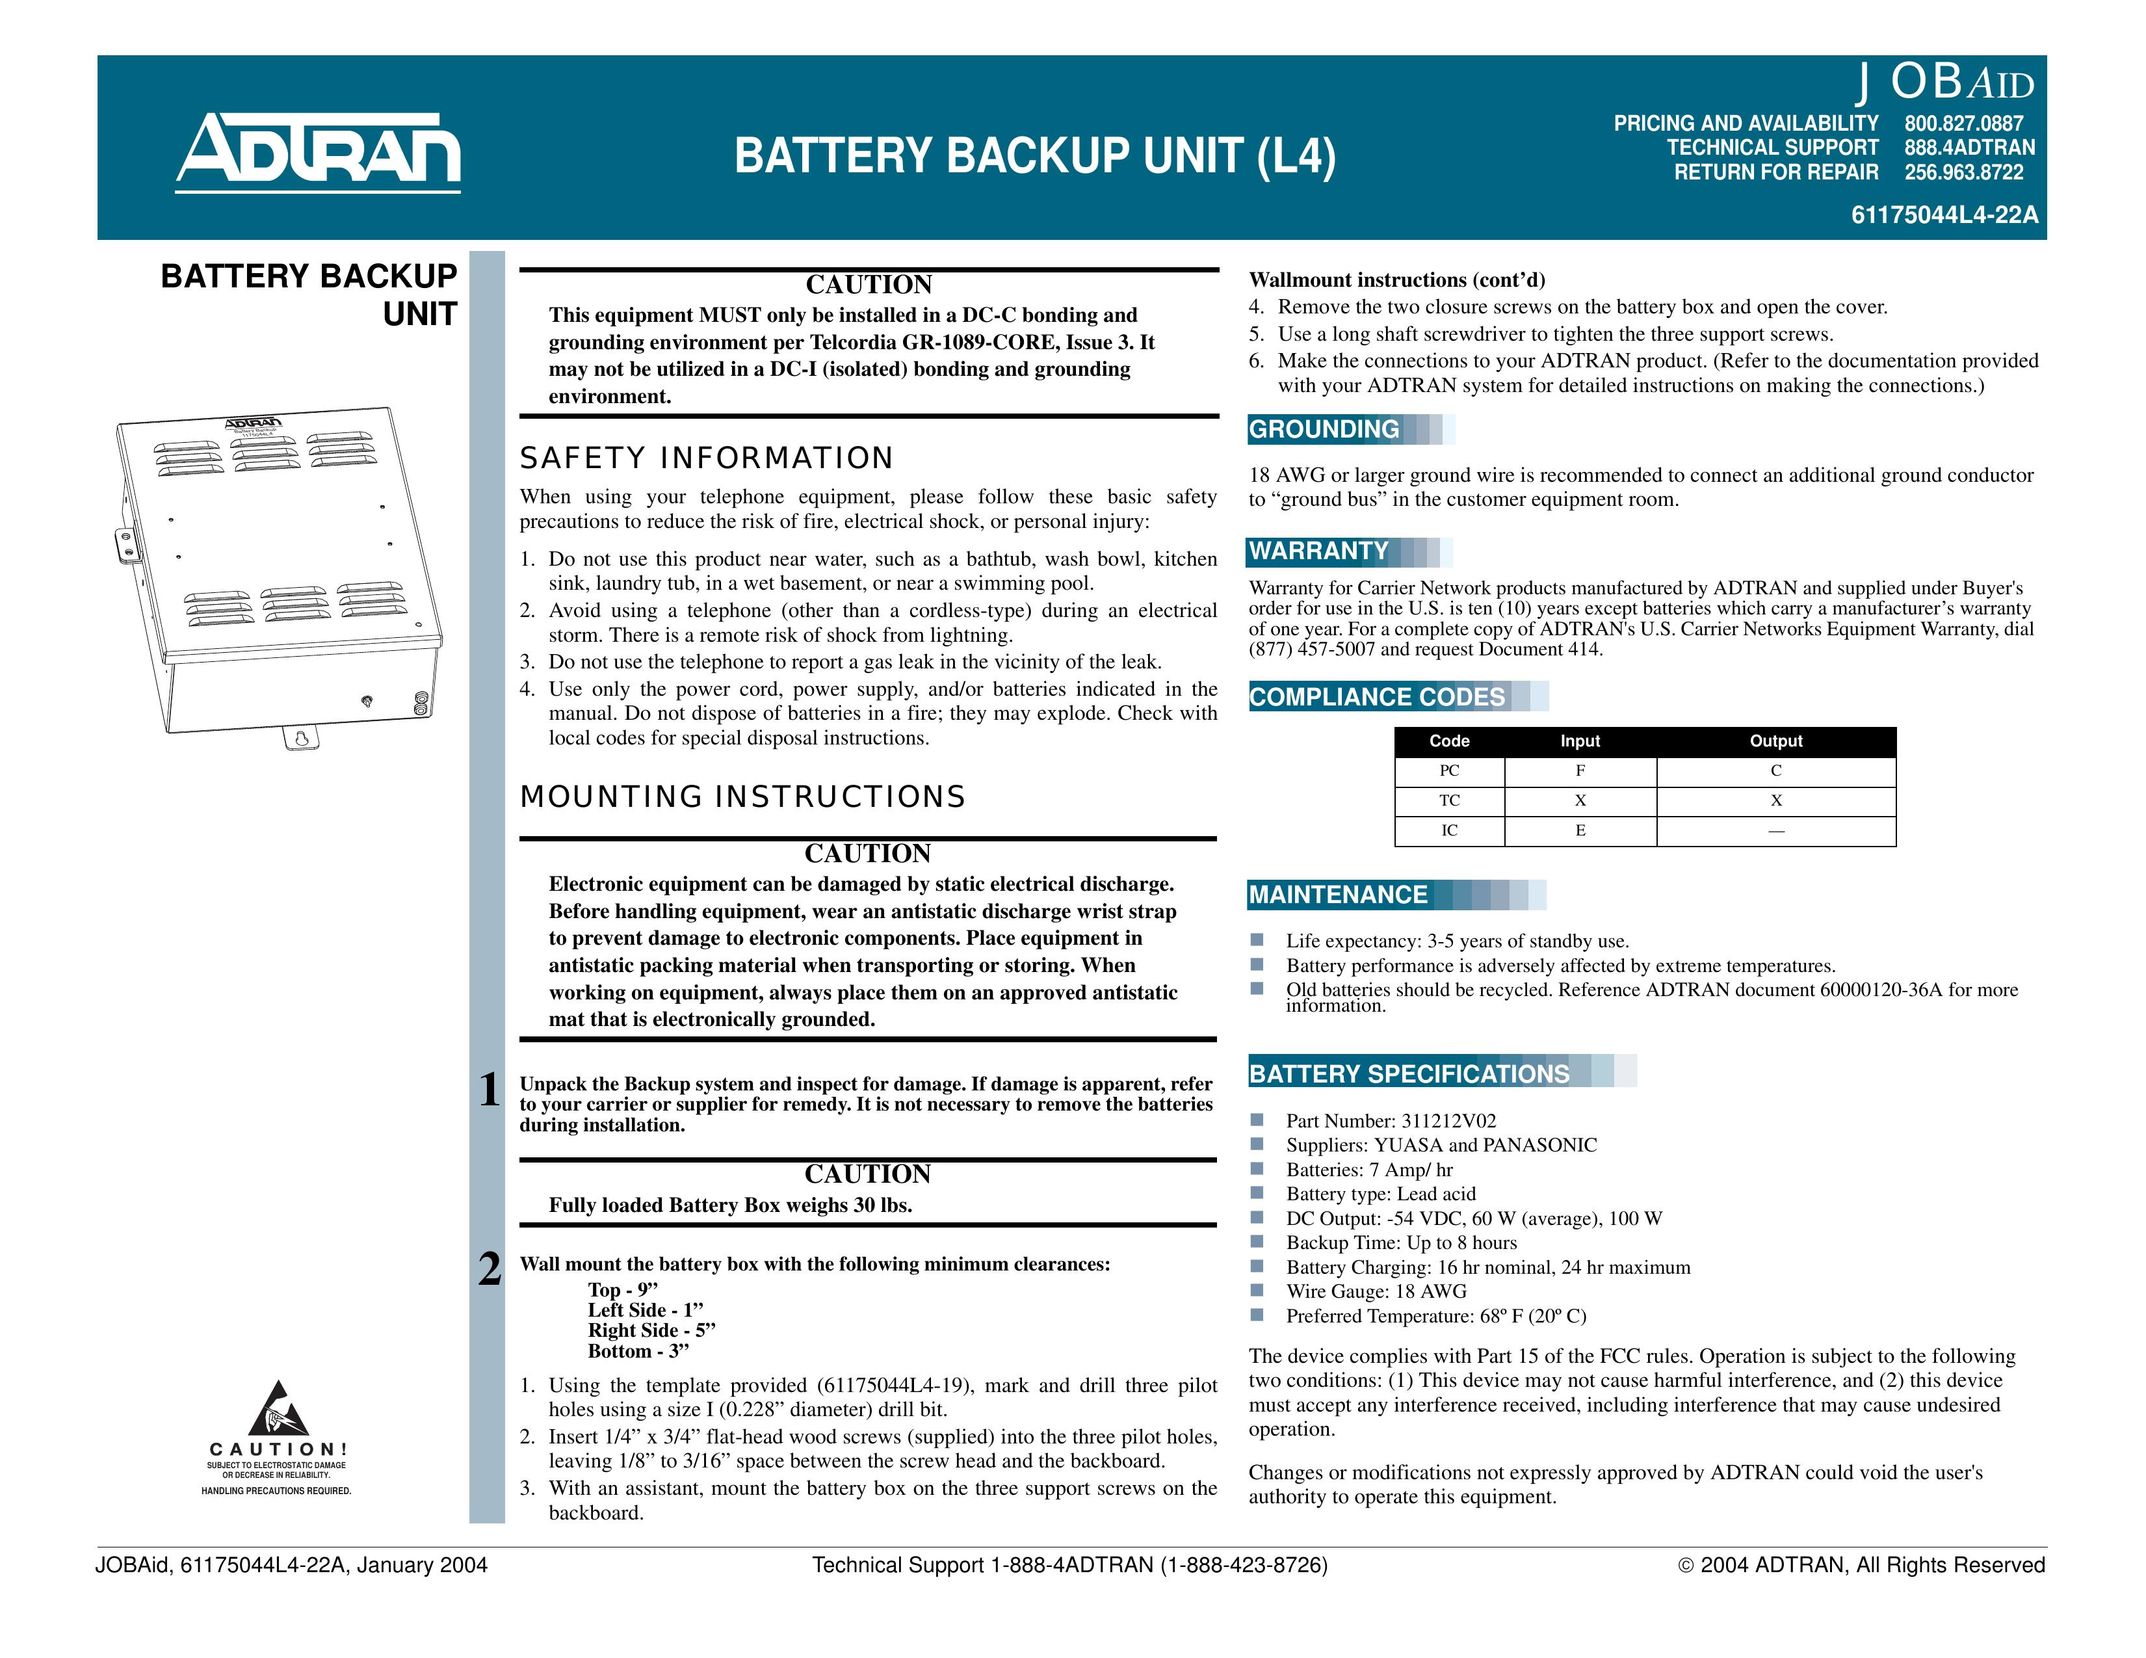 ADTRAN Battery Backup Unit (L4) Battery Charger User Manual (Page 1)